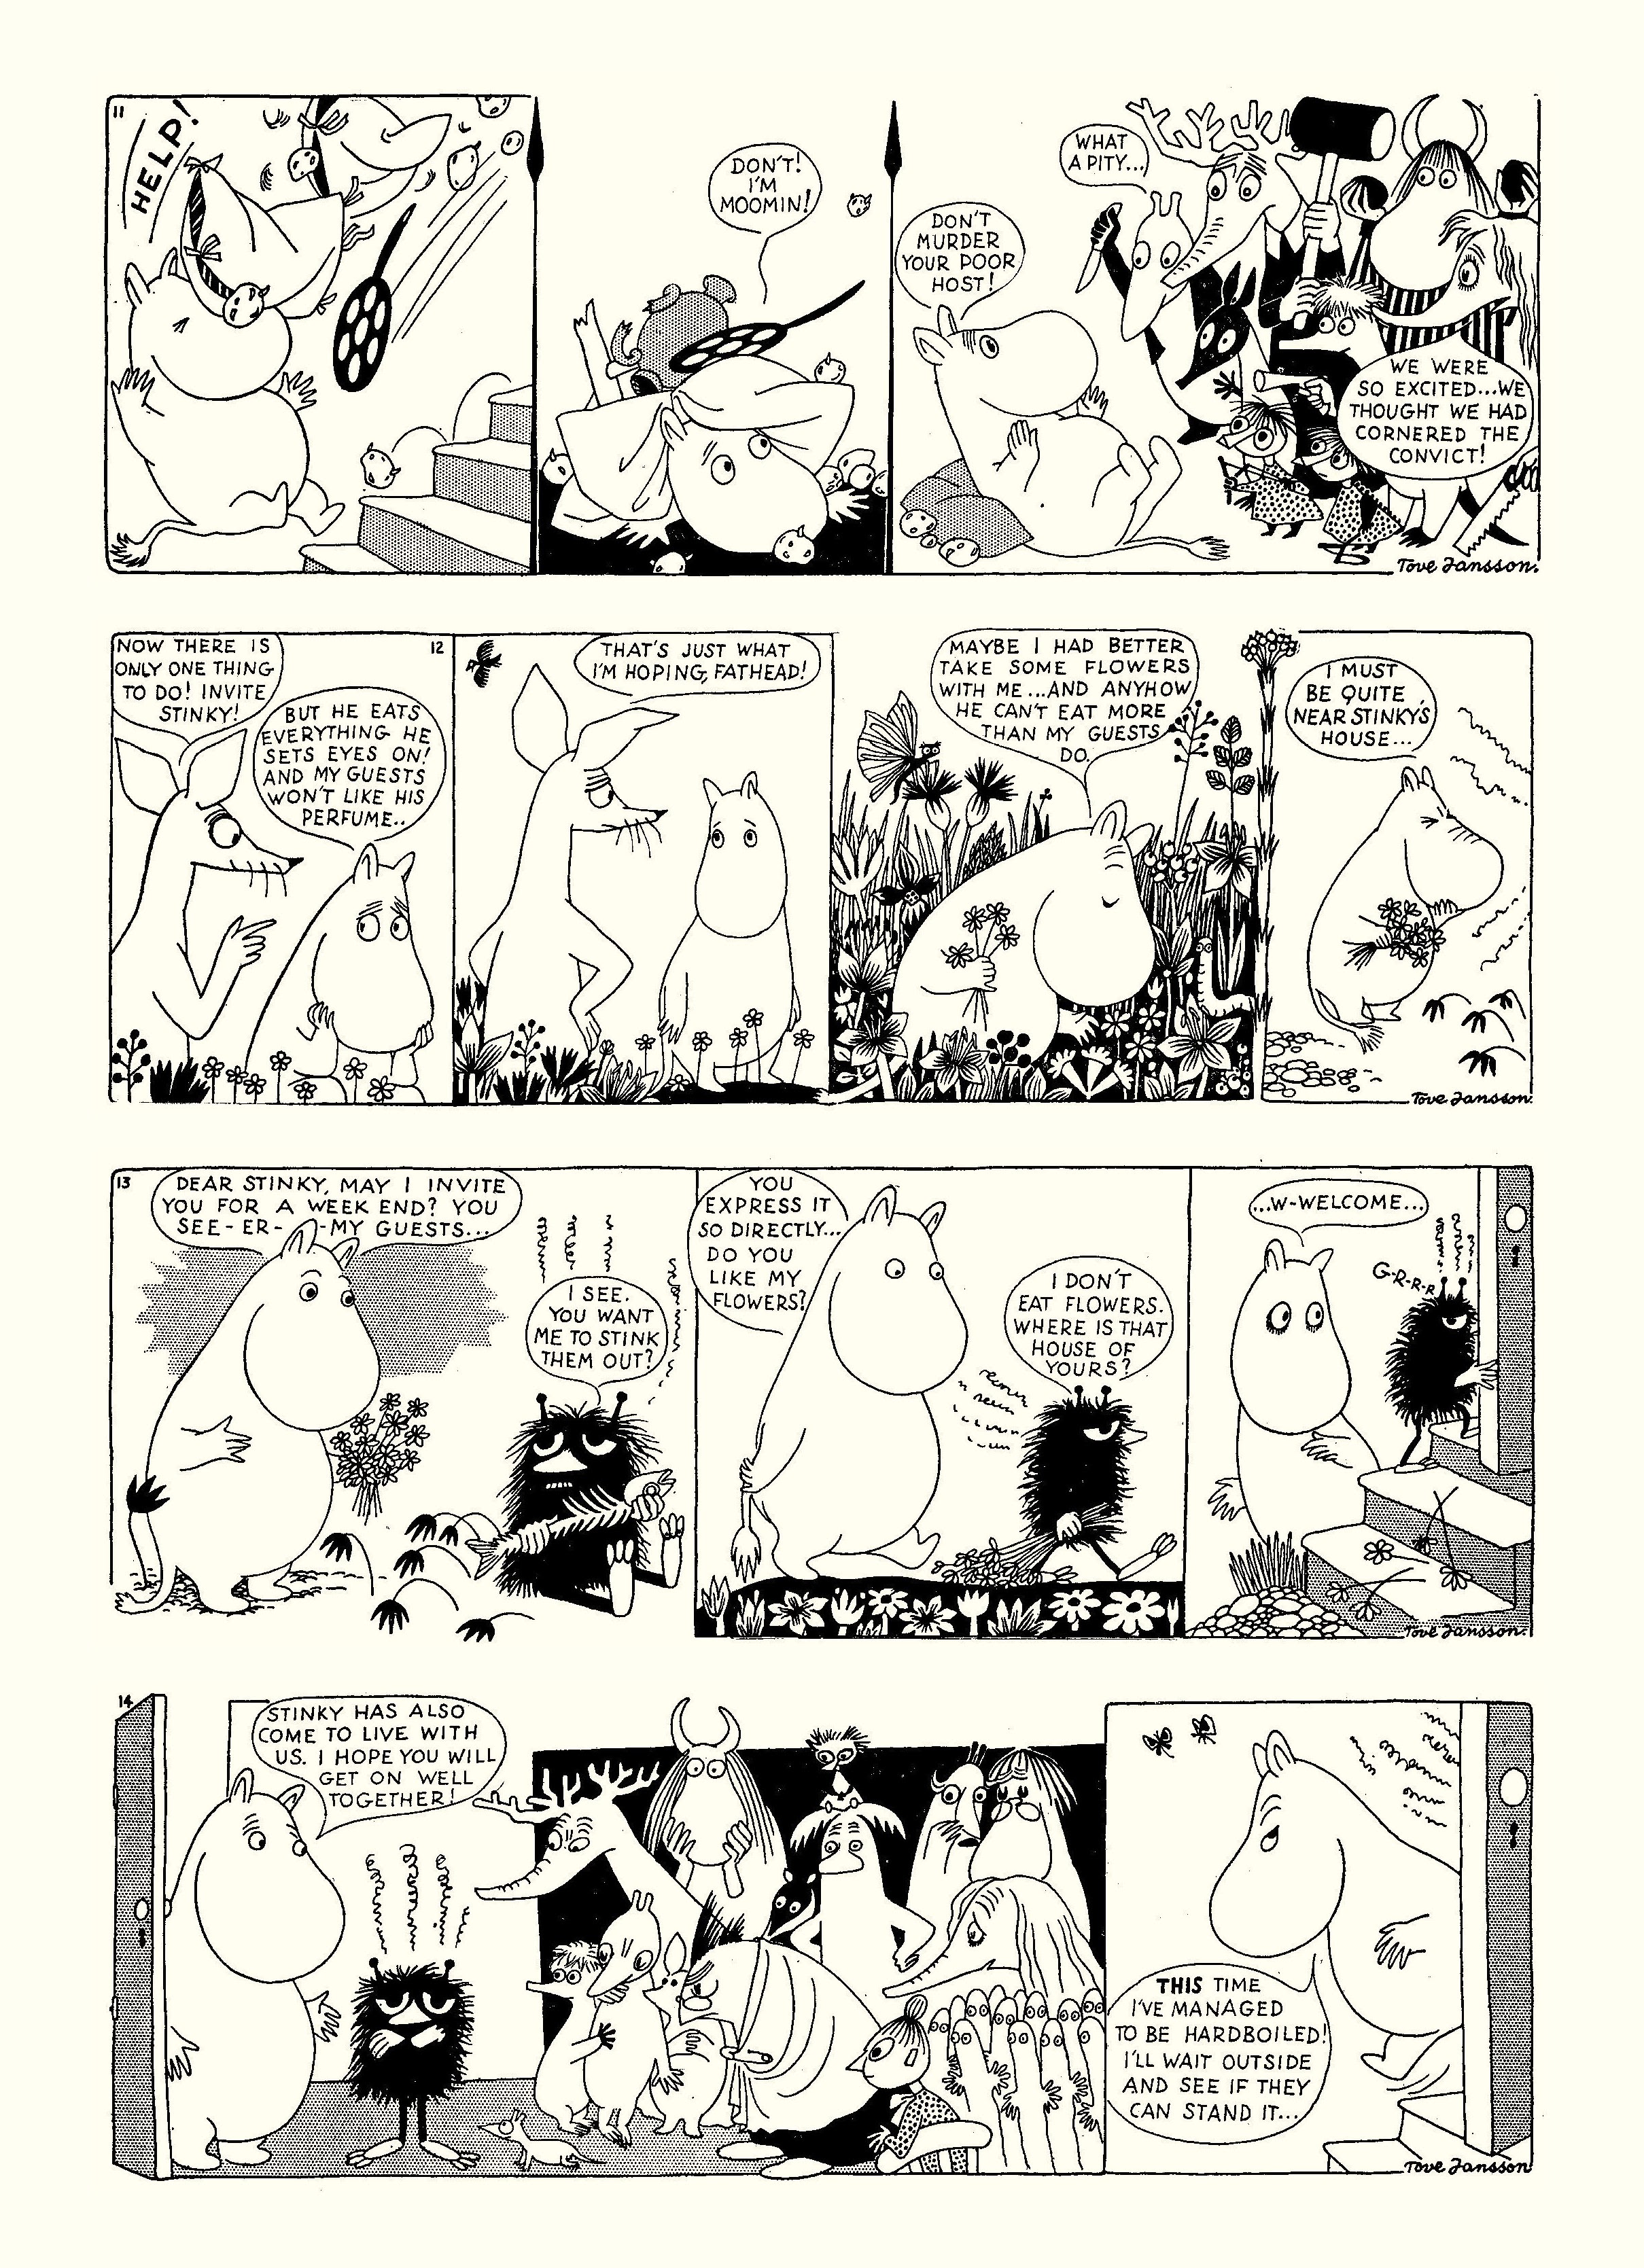 Read online Moomin: The Complete Tove Jansson Comic Strip comic -  Issue # TPB 1 - 9